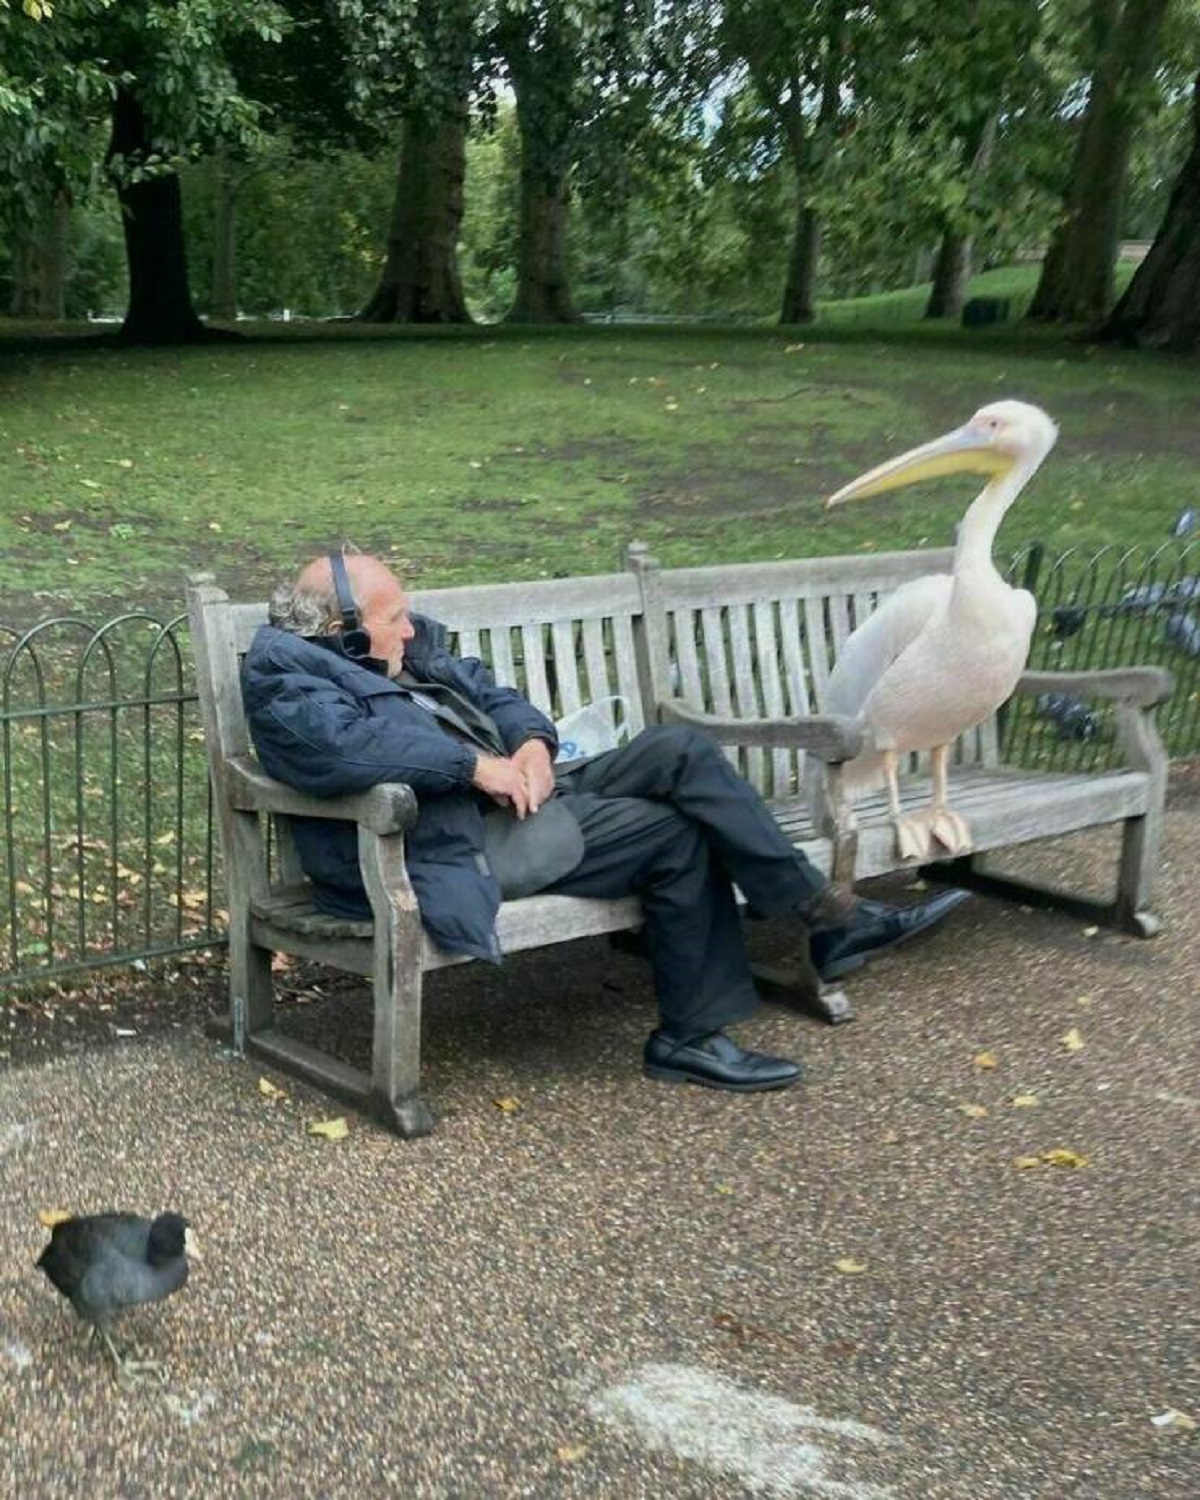 "A Pelican Chillin With A Friend At St James’ Park In England"